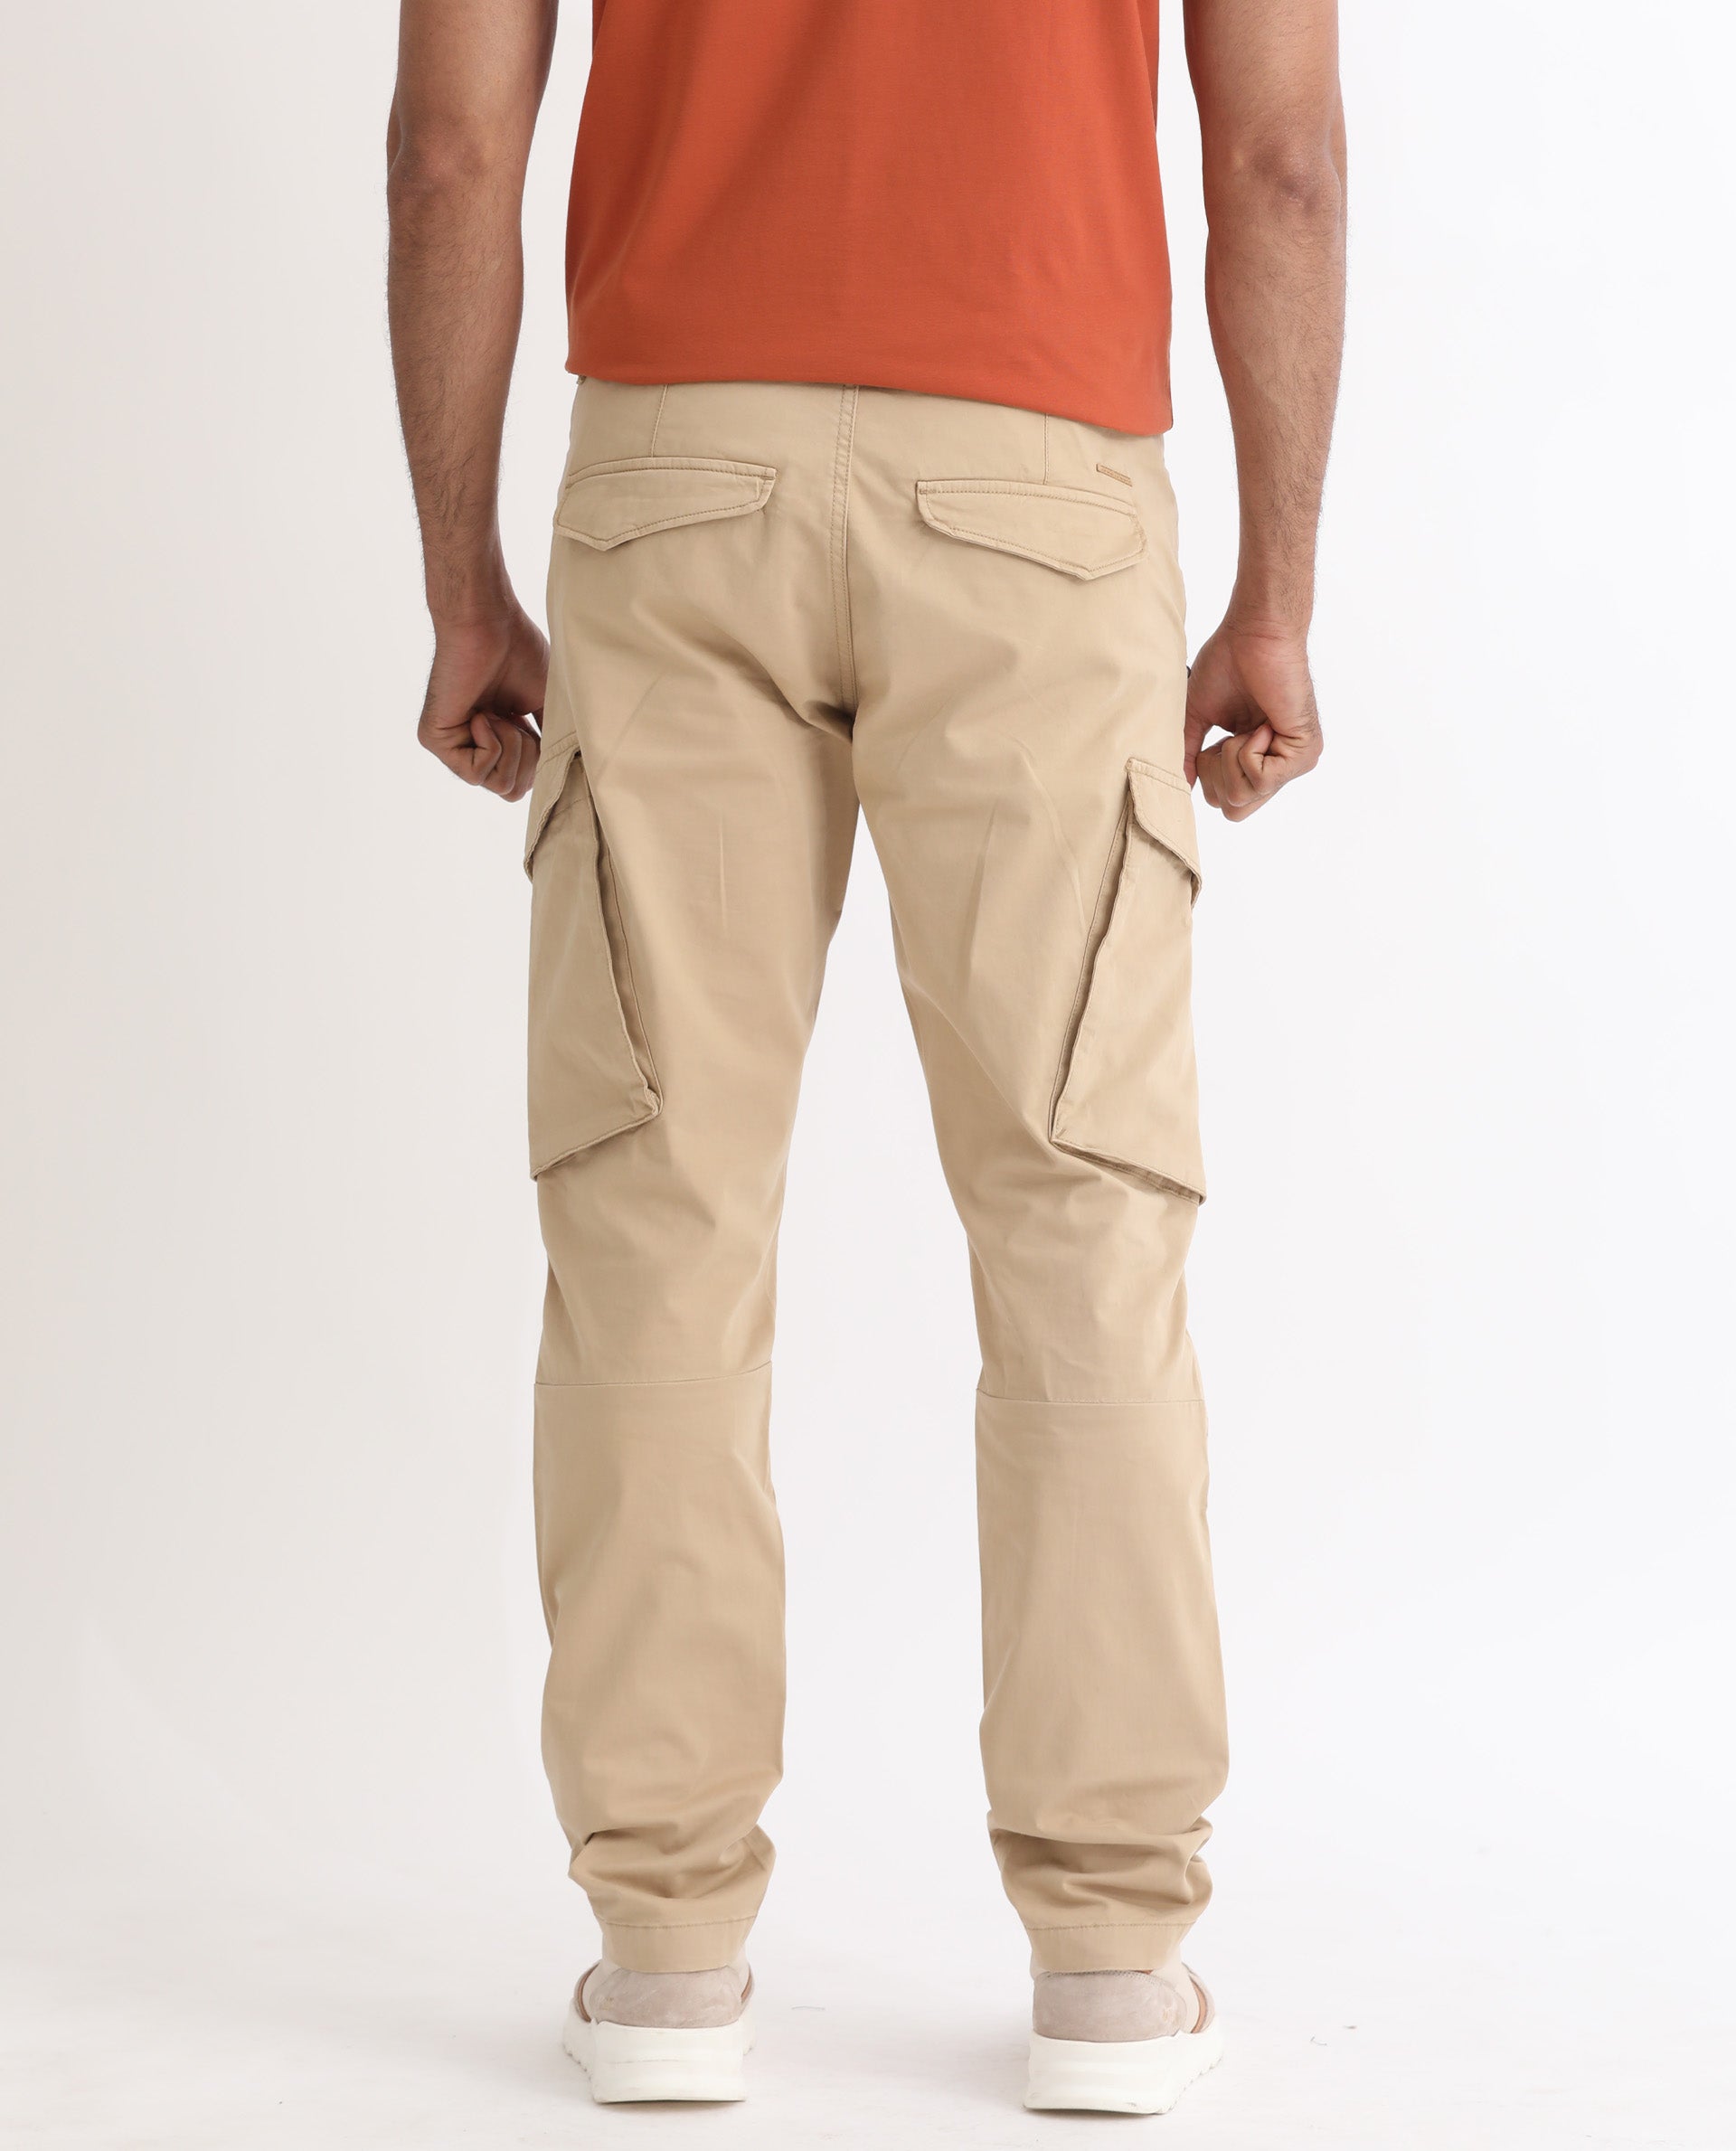 Beige Cargo Pants with White T-shirt Outfits (80 ideas & outfits